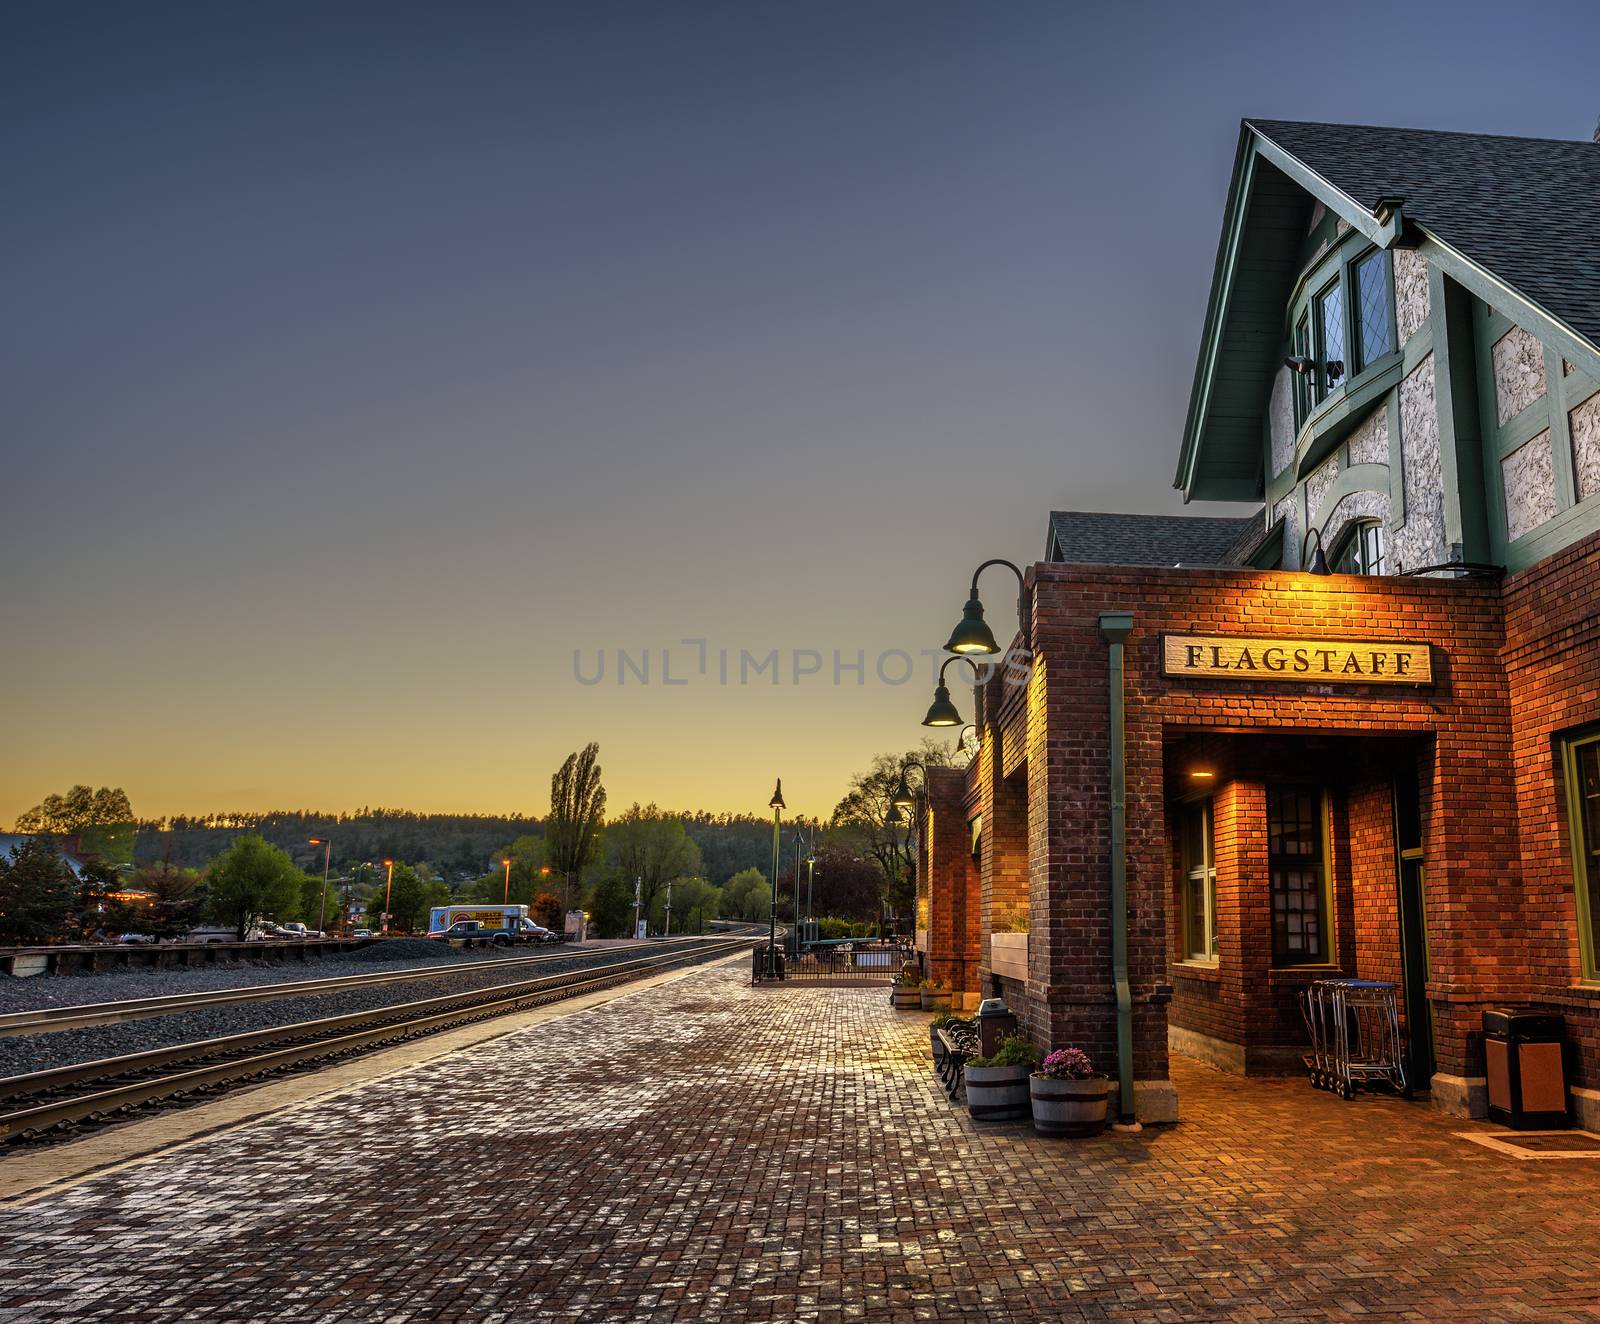 FLAGSTAFF, ARIZONA, USA - MAY 16, 2016 : Historic train station in Flagstaff at sunset. It is located on Route 66 and is formerly known as Atchison, Topeka and Santa Fe Railway depot. Hdr processed.